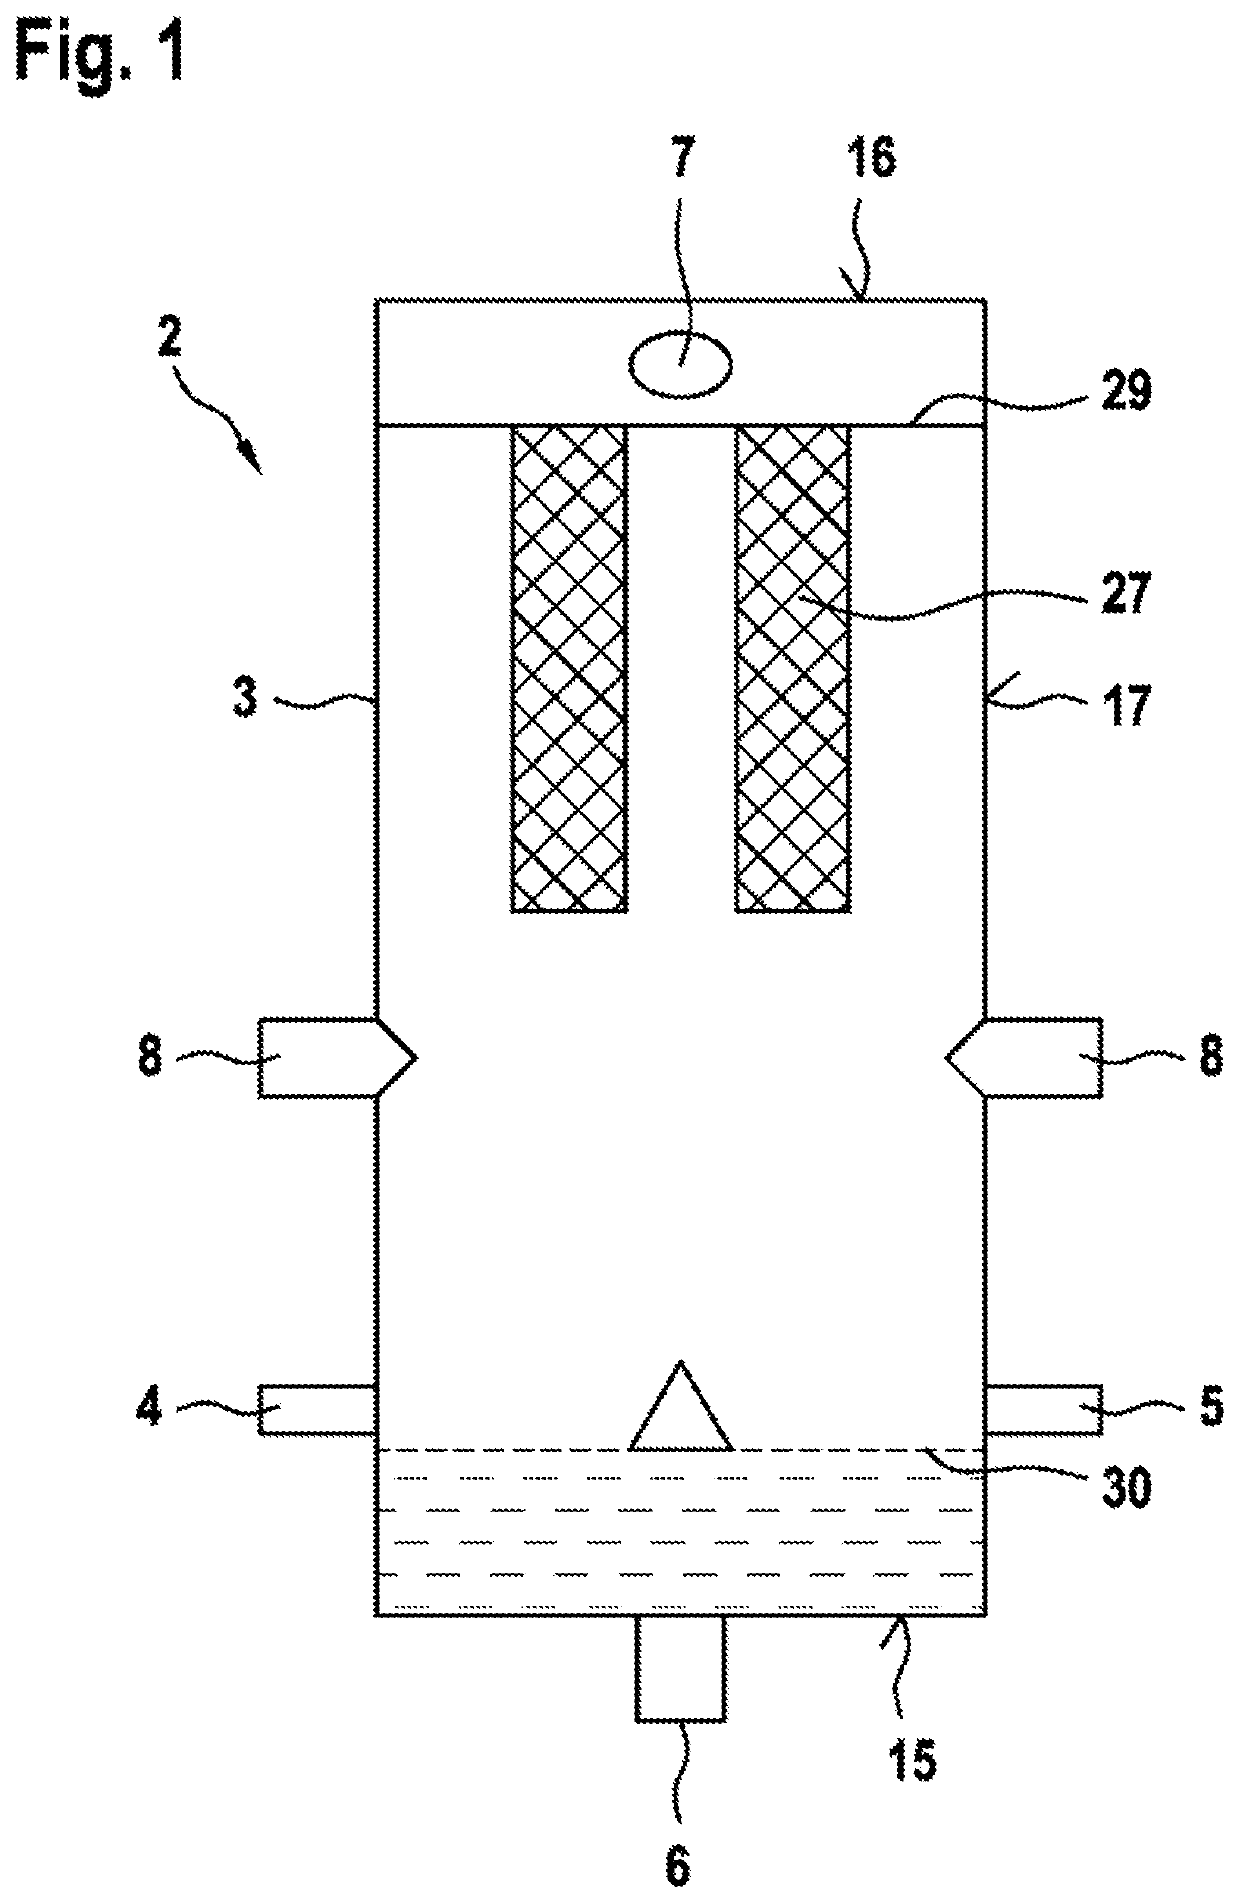 Fluidized bed system